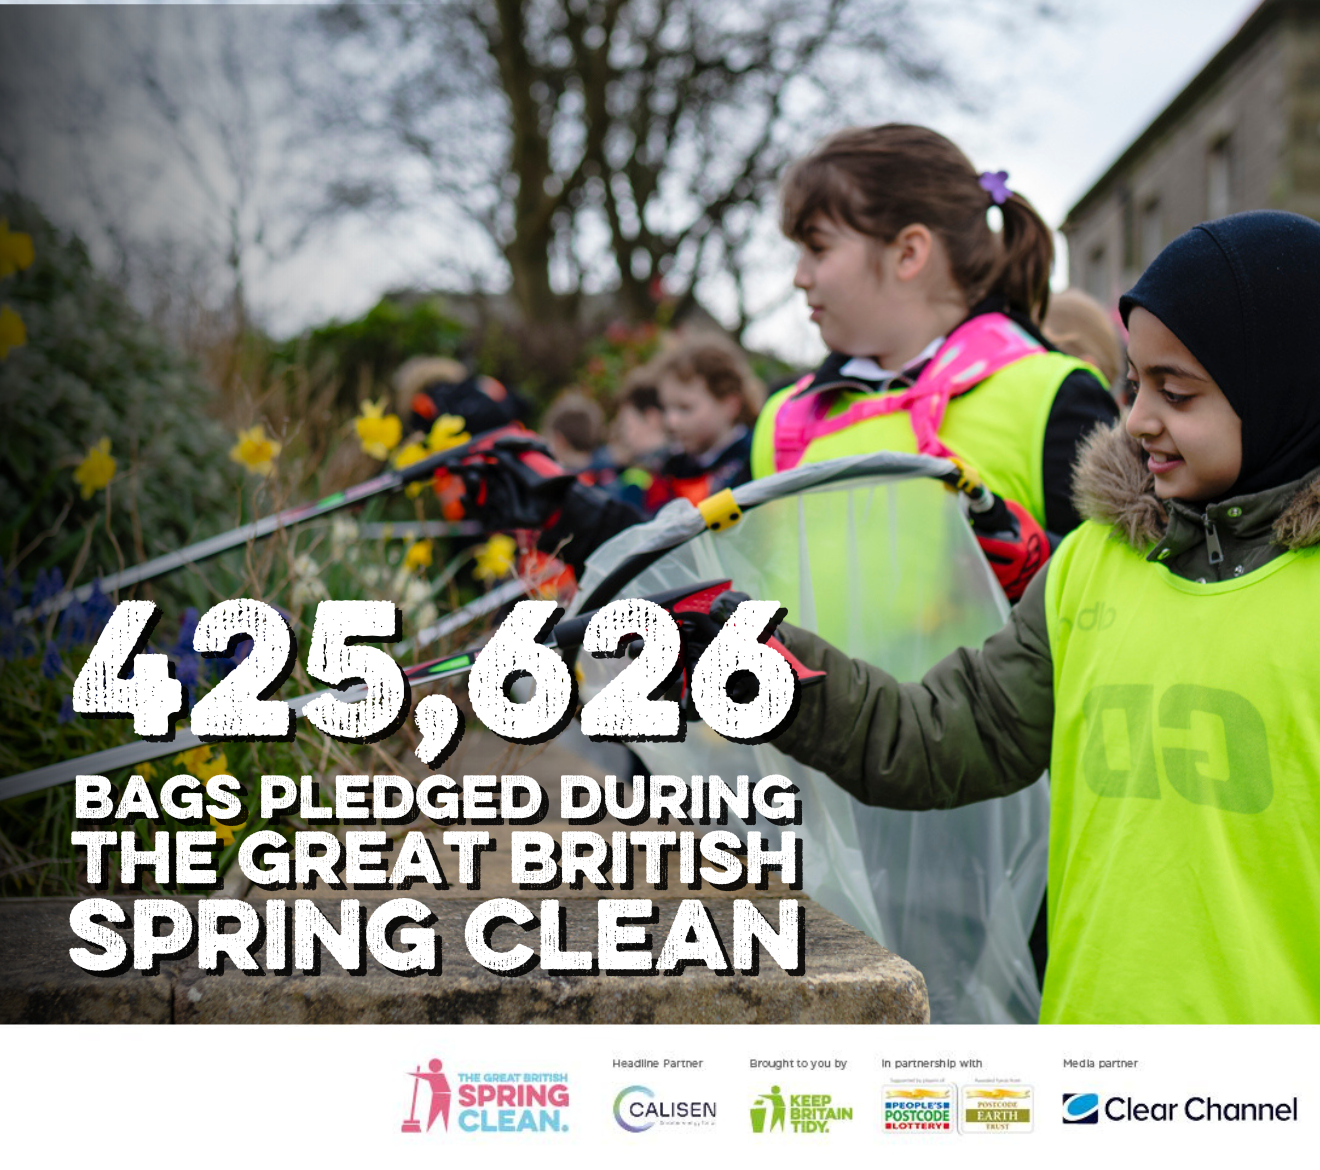 425,626 bags pledged during the Great British Spring Clean